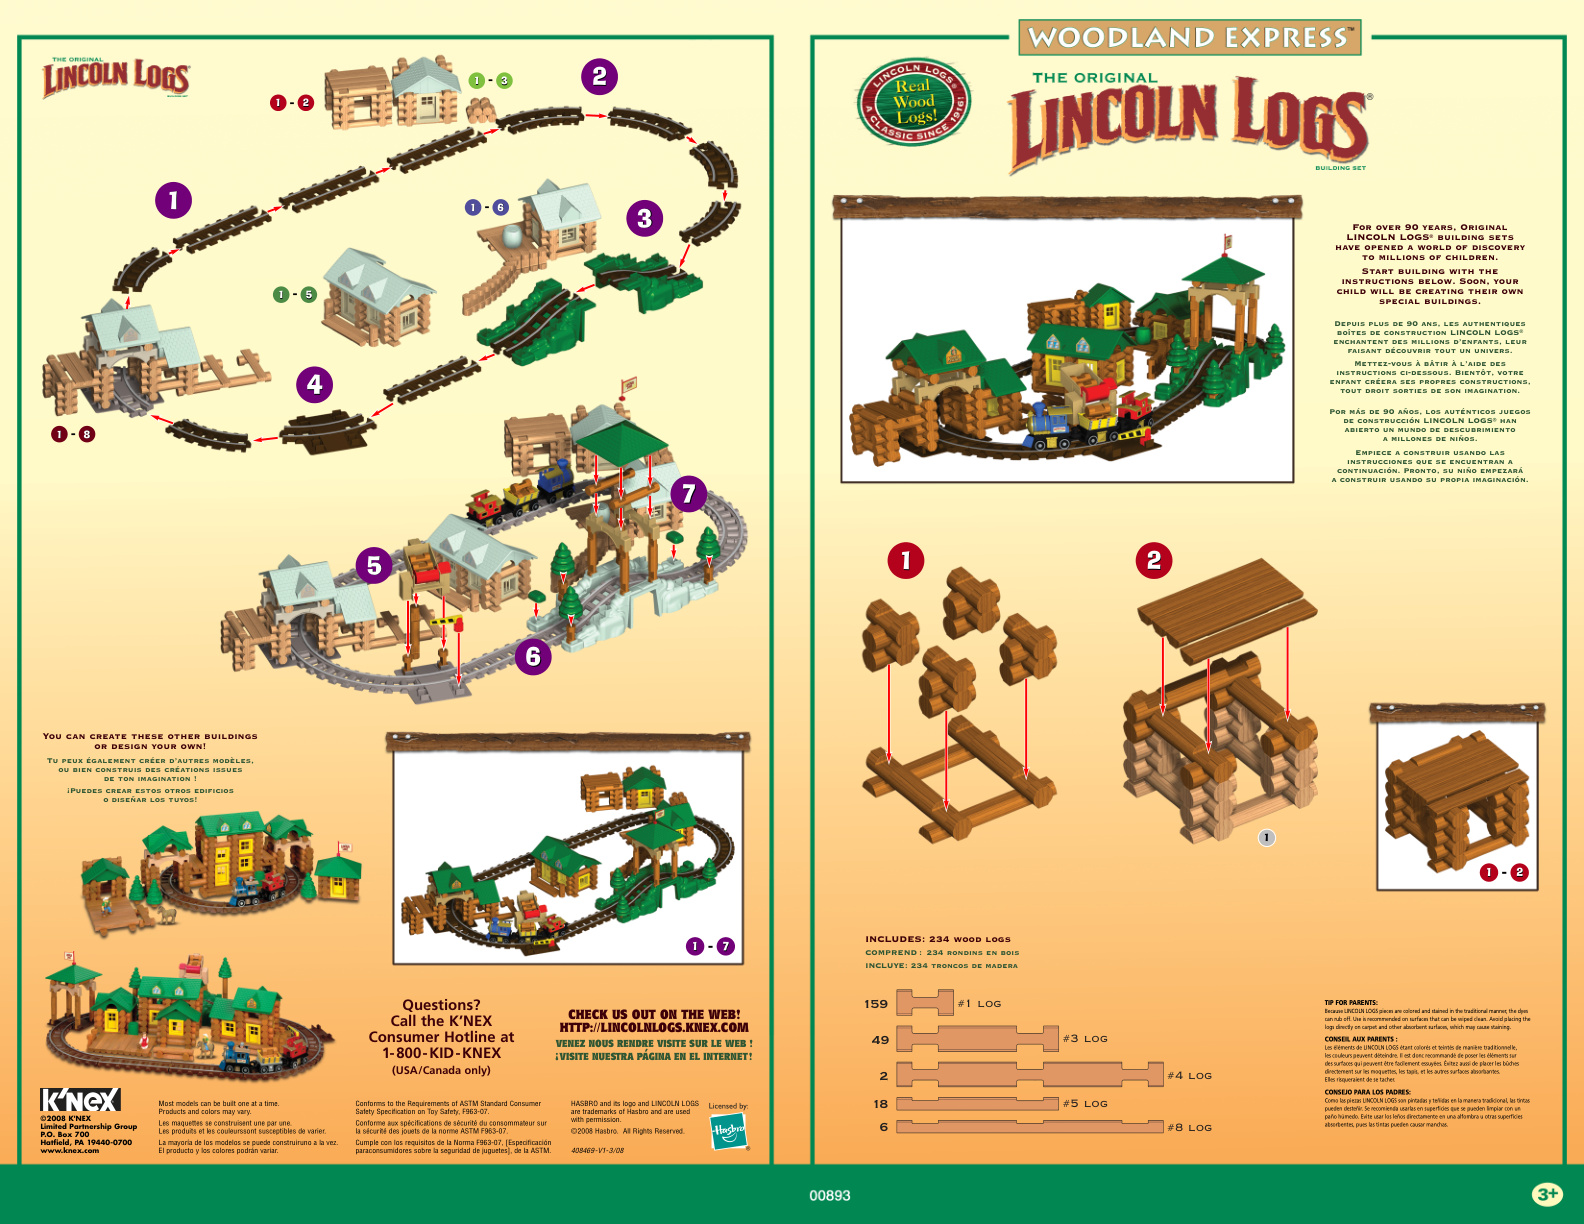 Lincoln Logs Woodland Express 00893